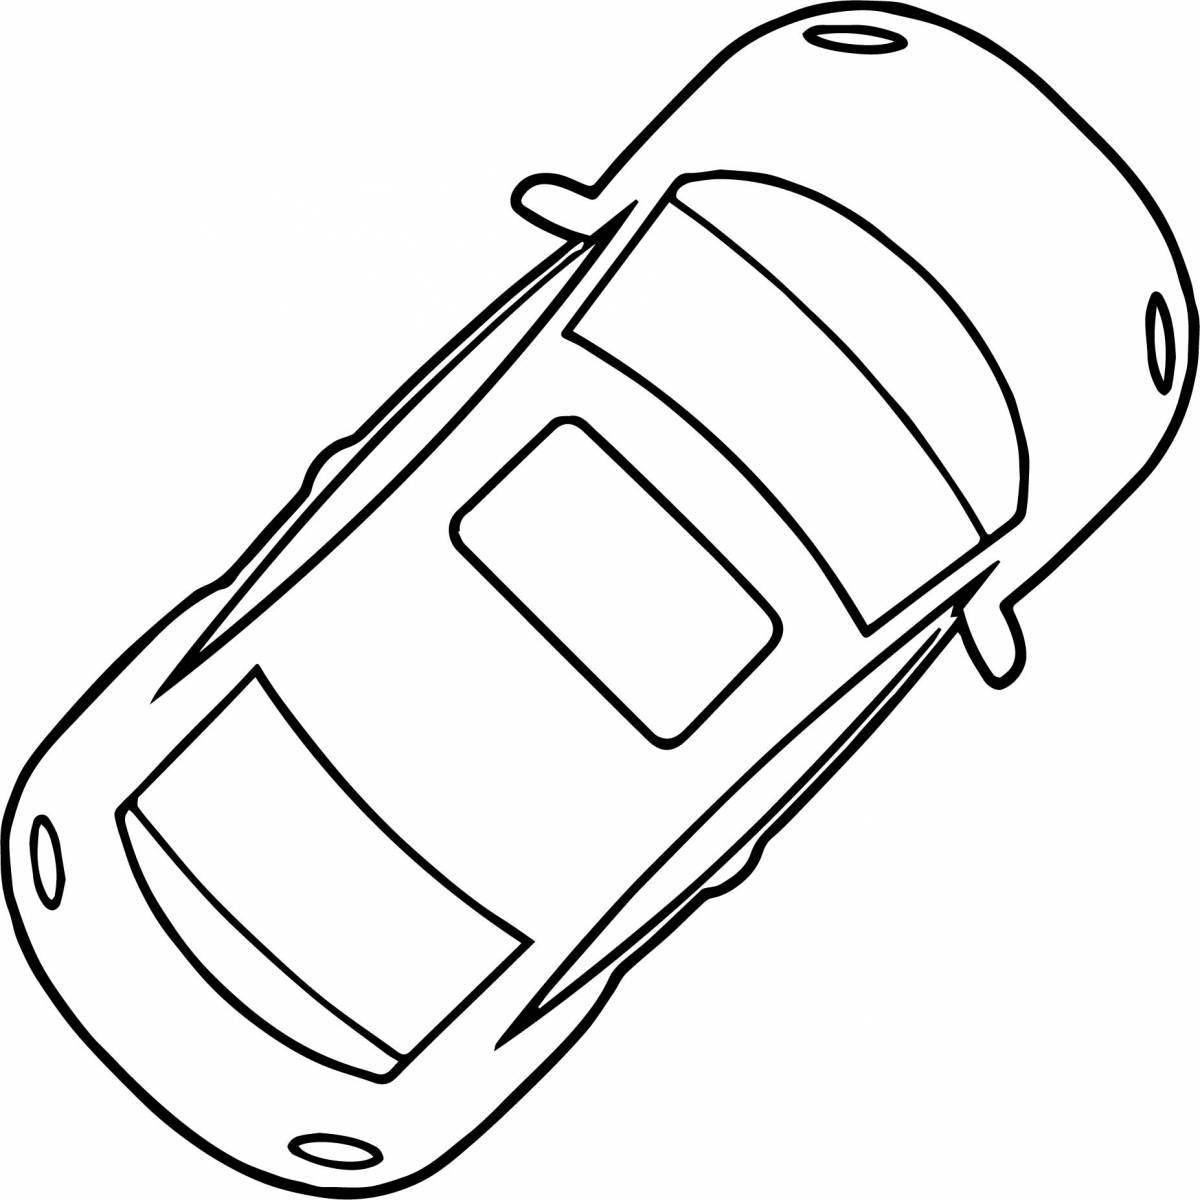 Exciting parking lot coloring page